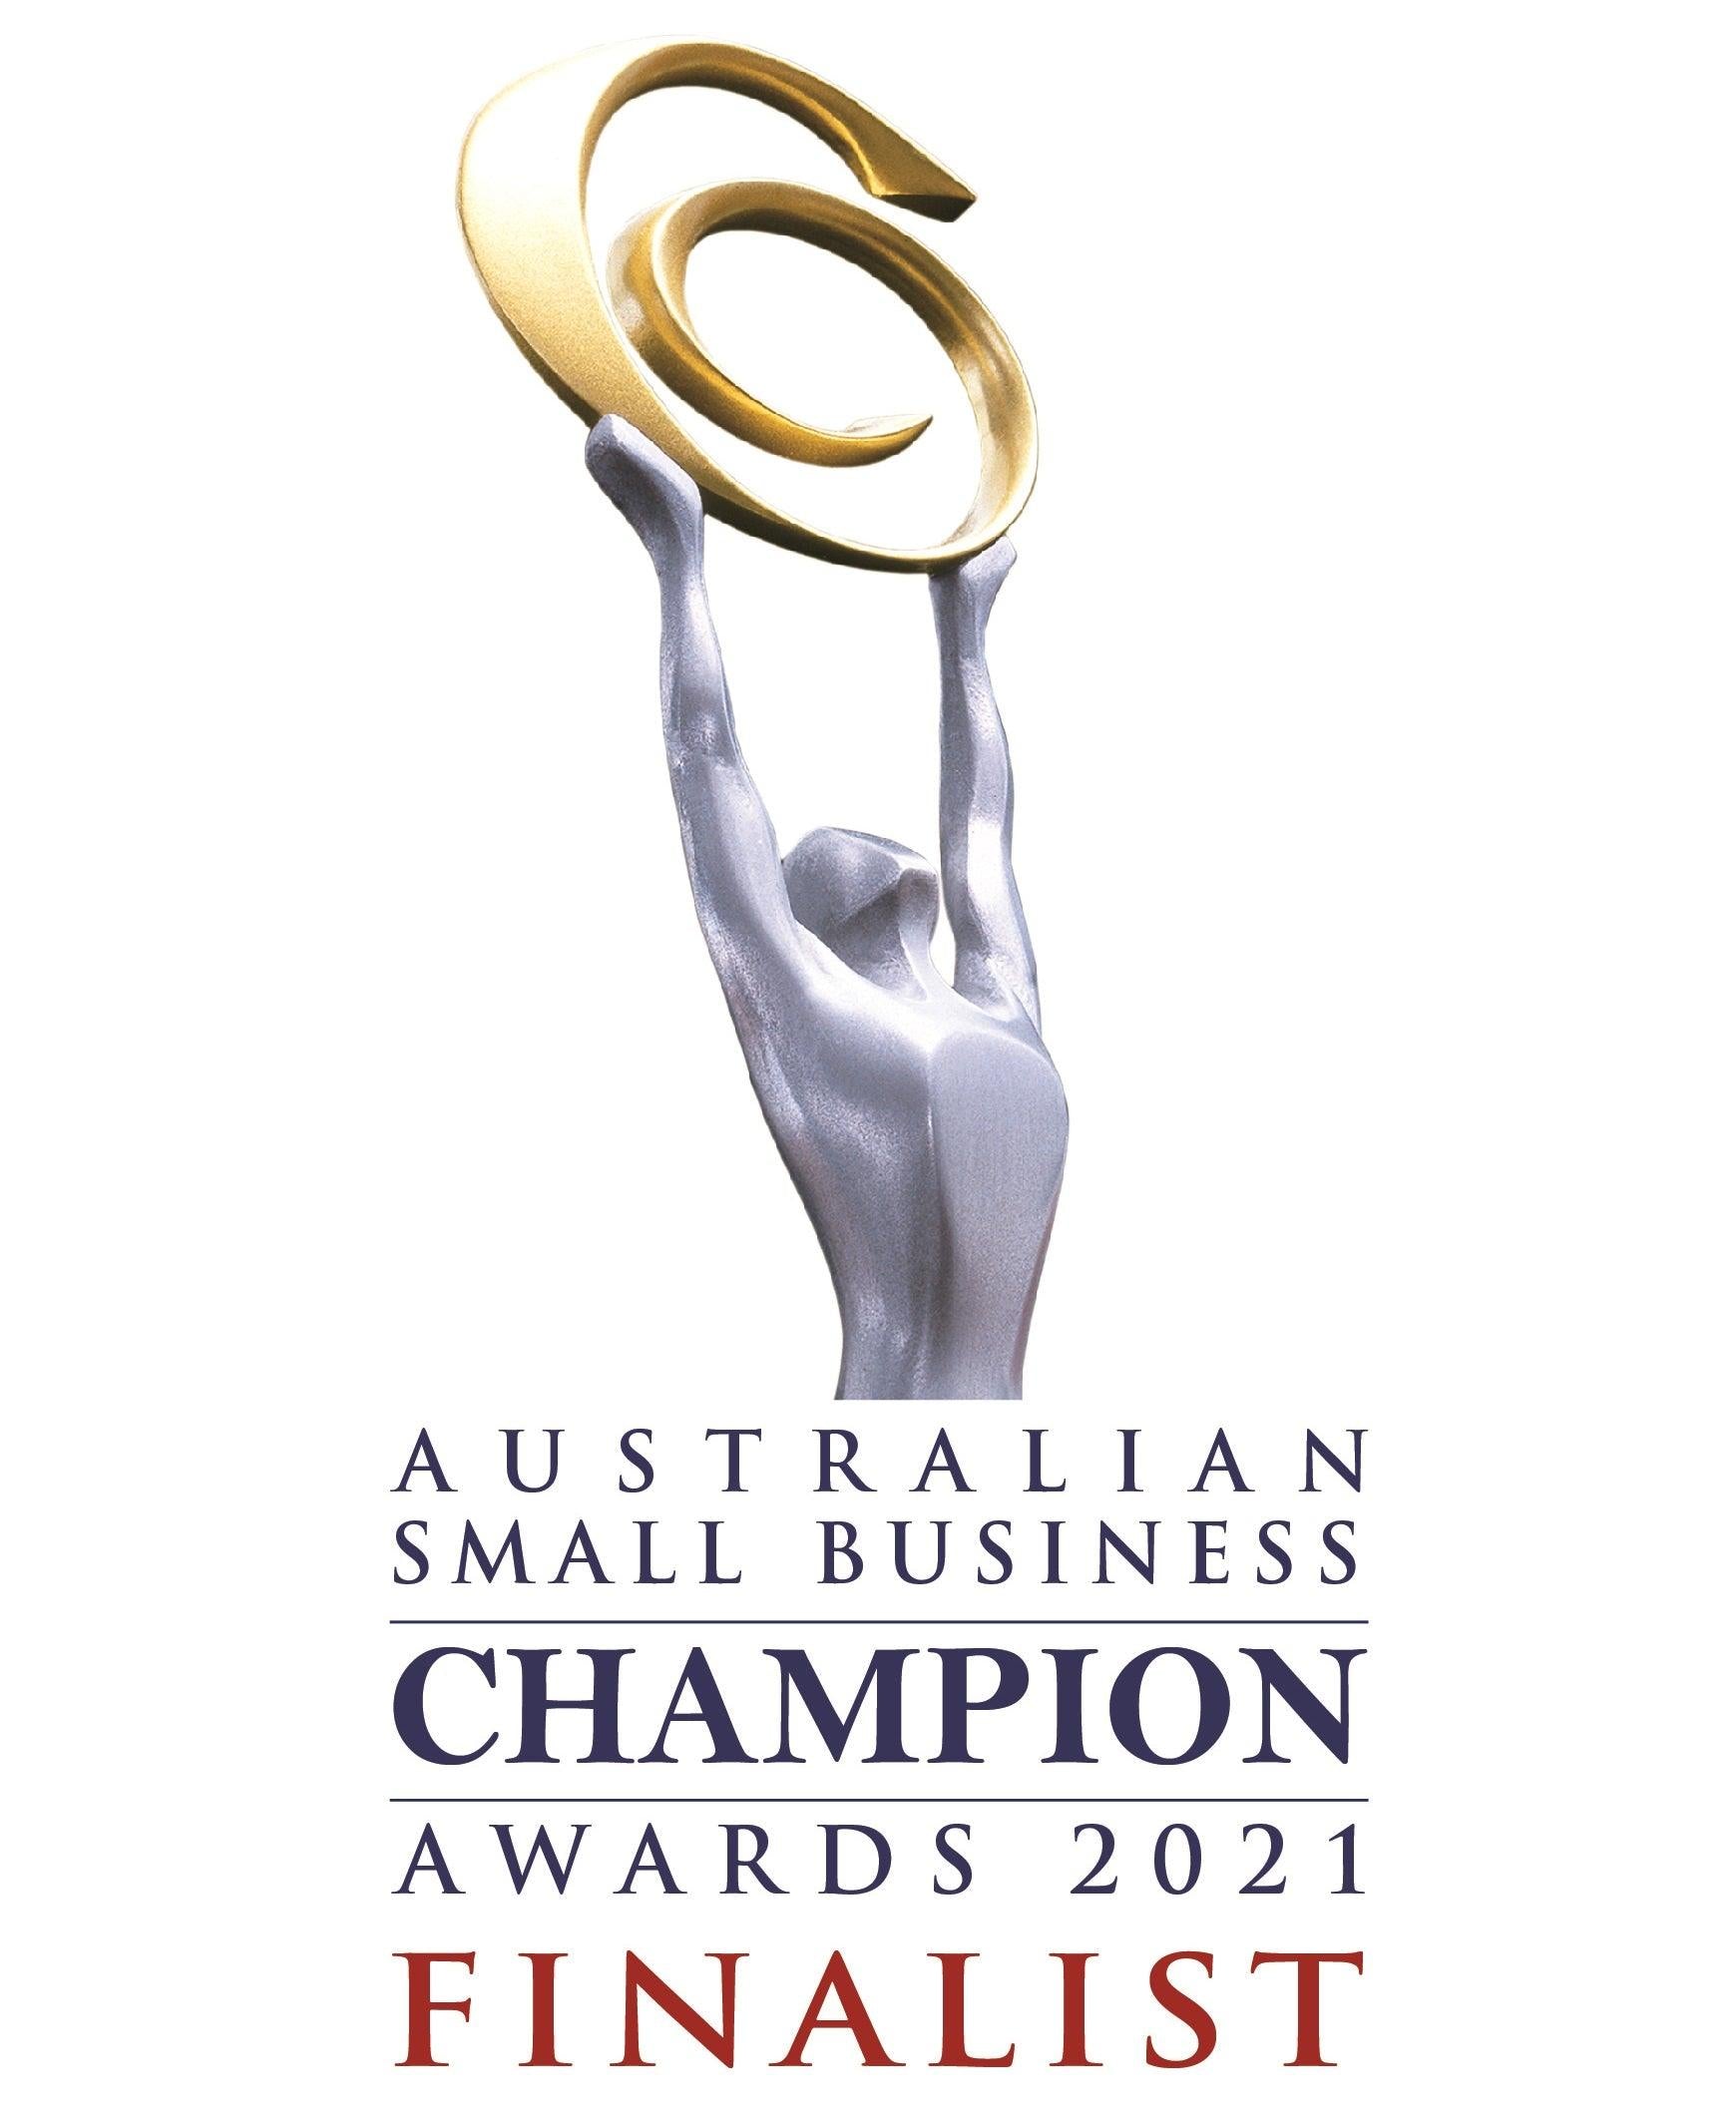 Milkie Co has been recognised as a finalist in the 2021 Australian Small Business Champion Awards! - Milkie Co